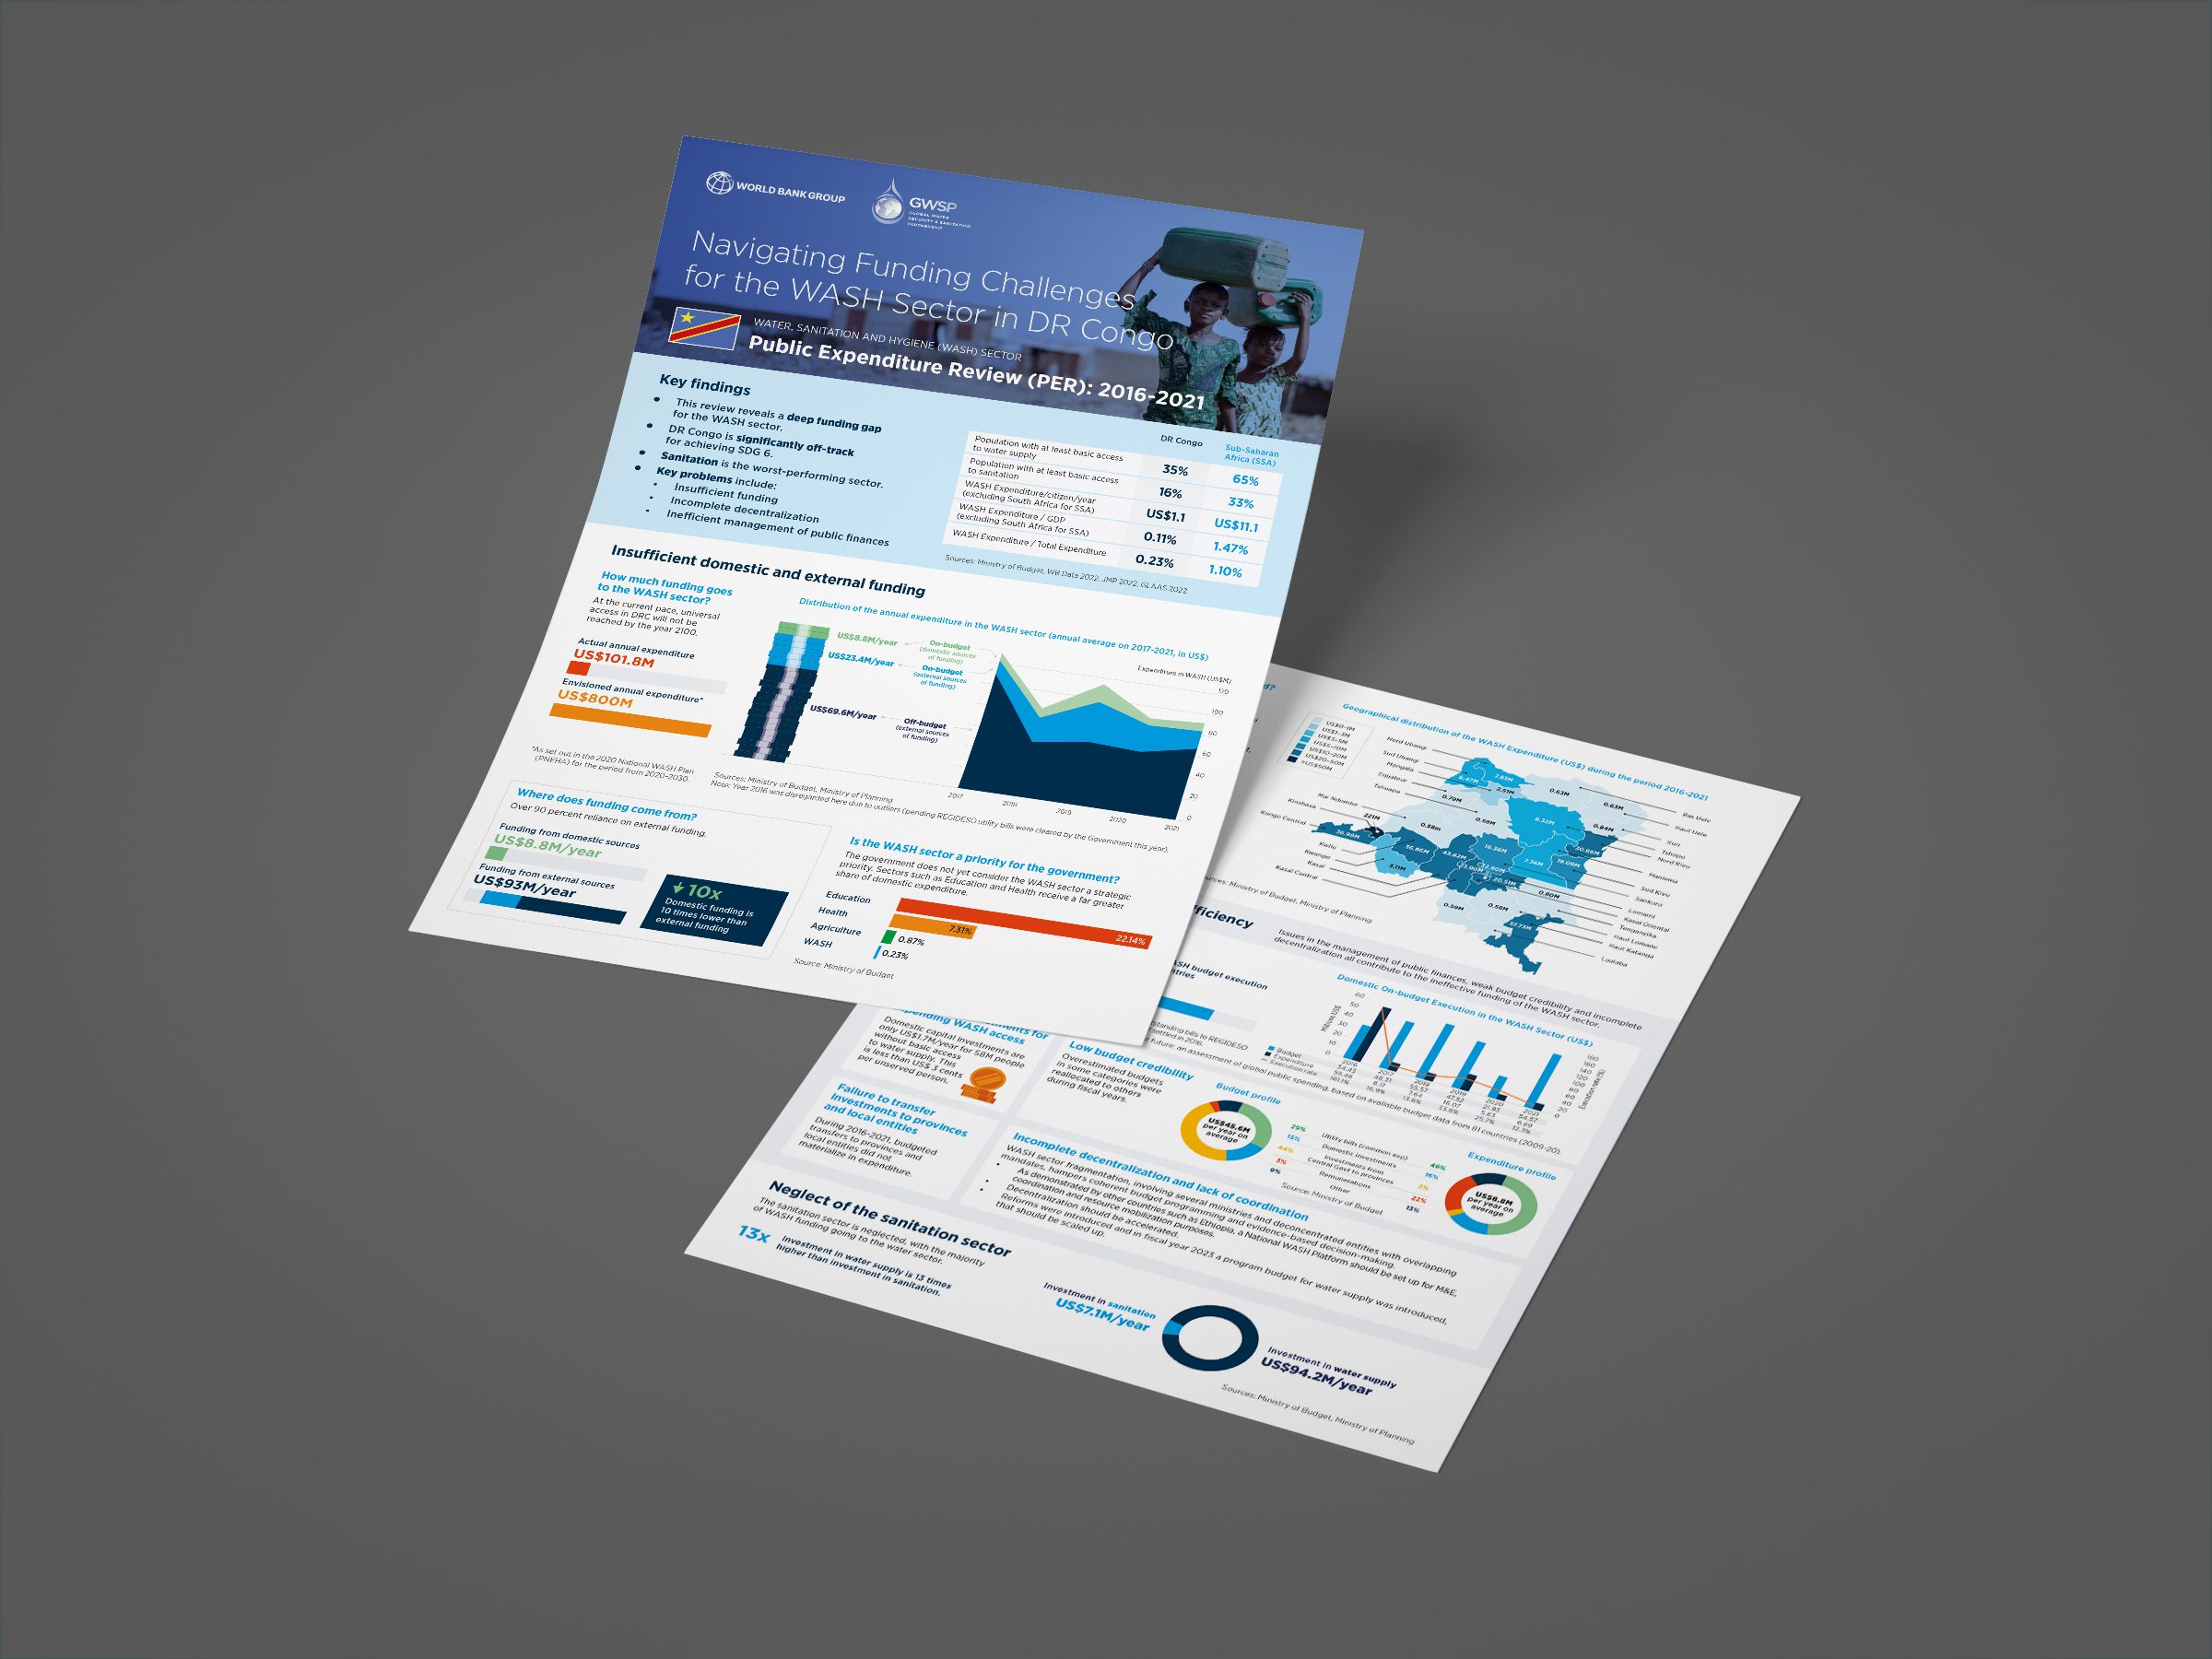 Two infographic sheets titled "Navigating Funding Challenges for the WASH Sector in DRCongo" showcase compelling funding data, expenditure reviews, and maps enriched with charts and statistics, illustrating a masterful blend of infographic design.